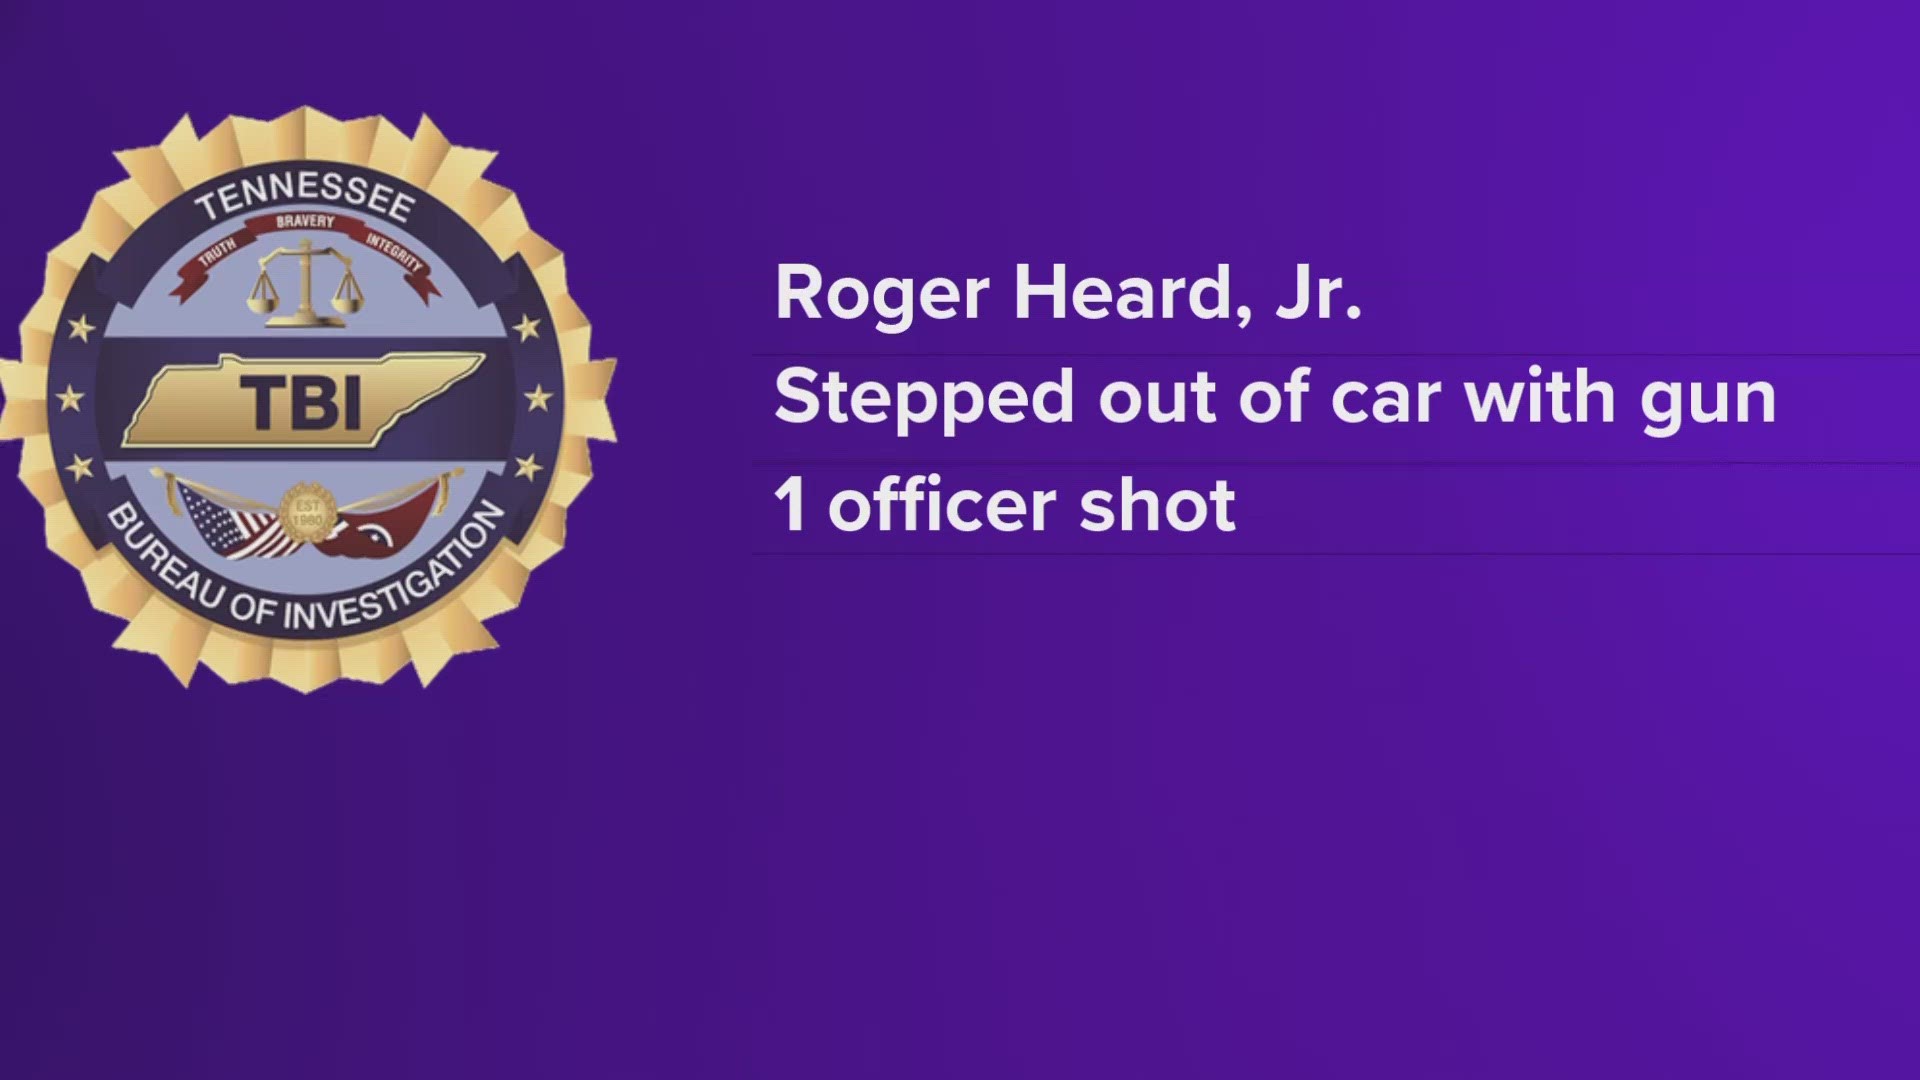 Chattanooga officers attempted to arrest Roger Heard Jr. on outstanding warrants when he got out of his car with a pistol in hand.